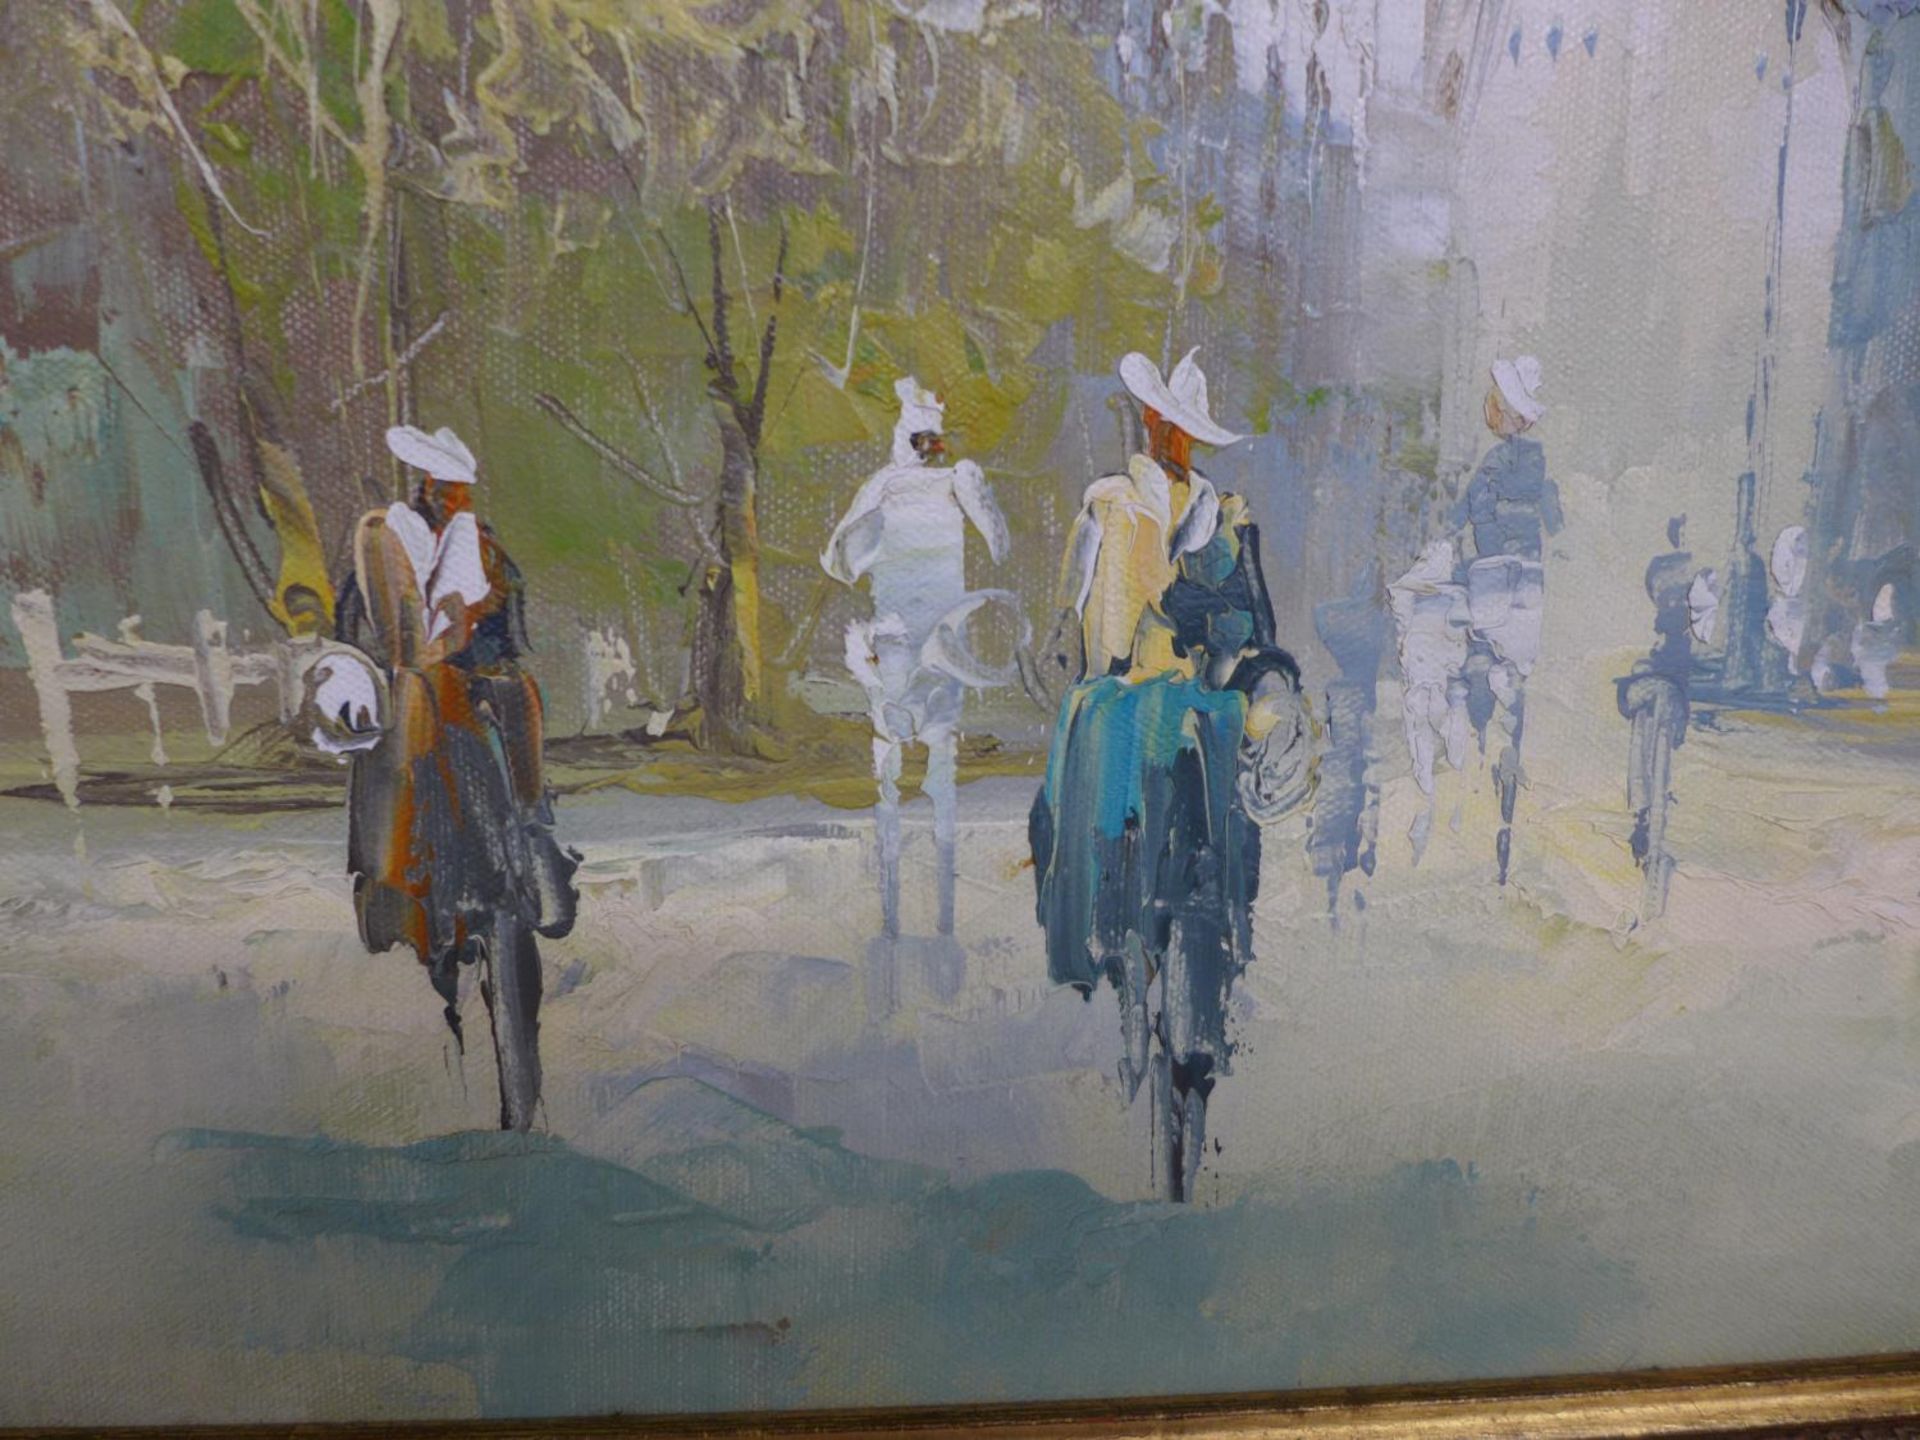 ROD ANSTON (?) CONTINENTAL STREET SCENE, OIL ON CANVAS, SIGNED, 59X90CM, FRAMED - Image 3 of 4